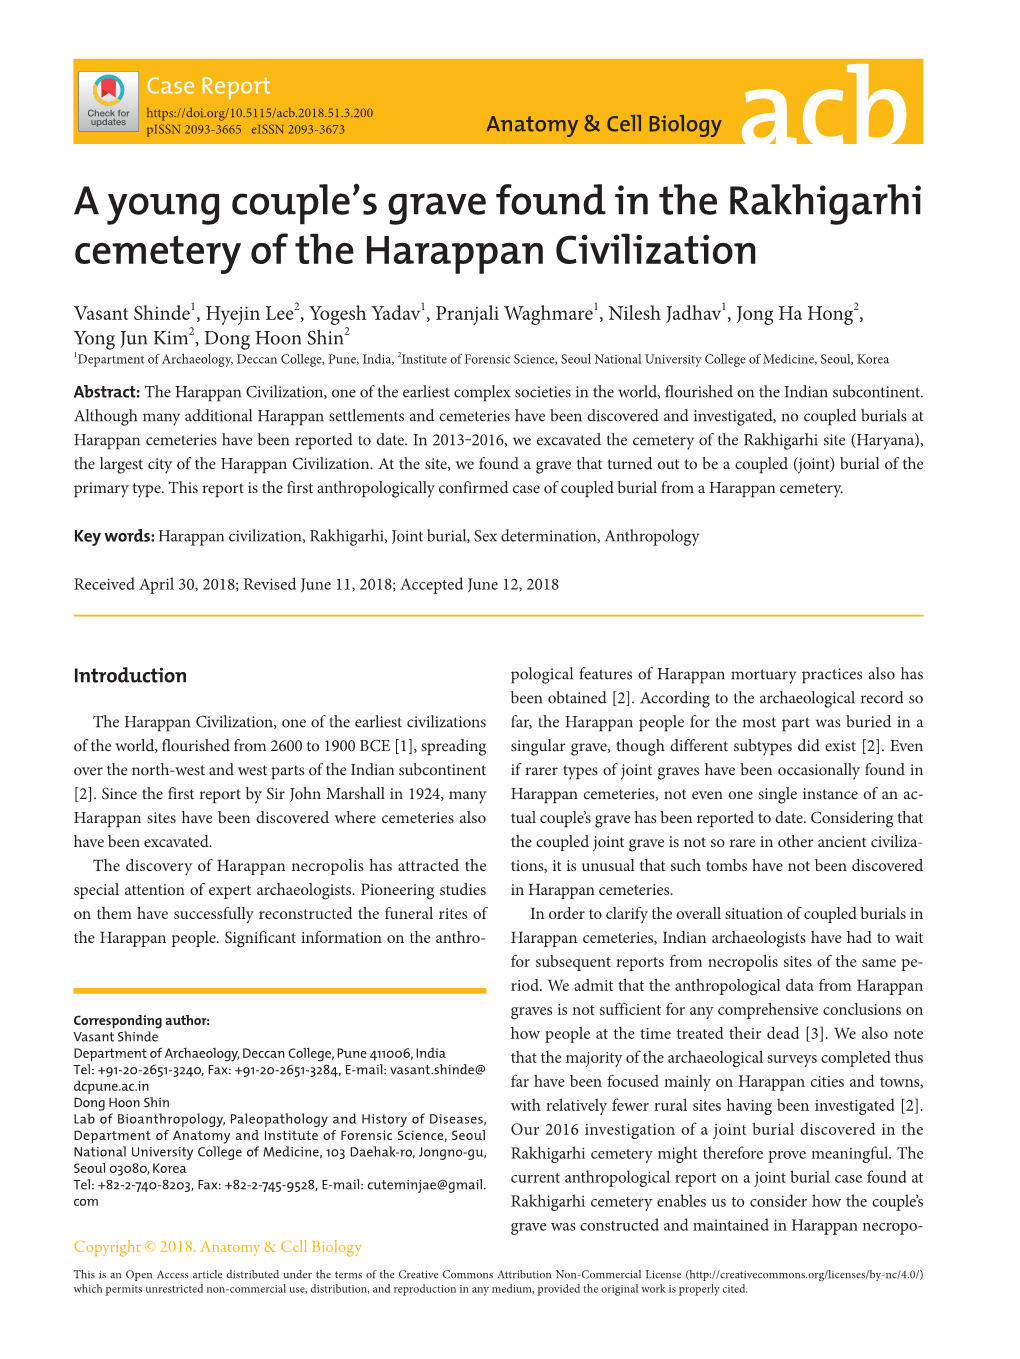 A Young Couple's Grave Found in the Rakhigarhi Cemetery of The